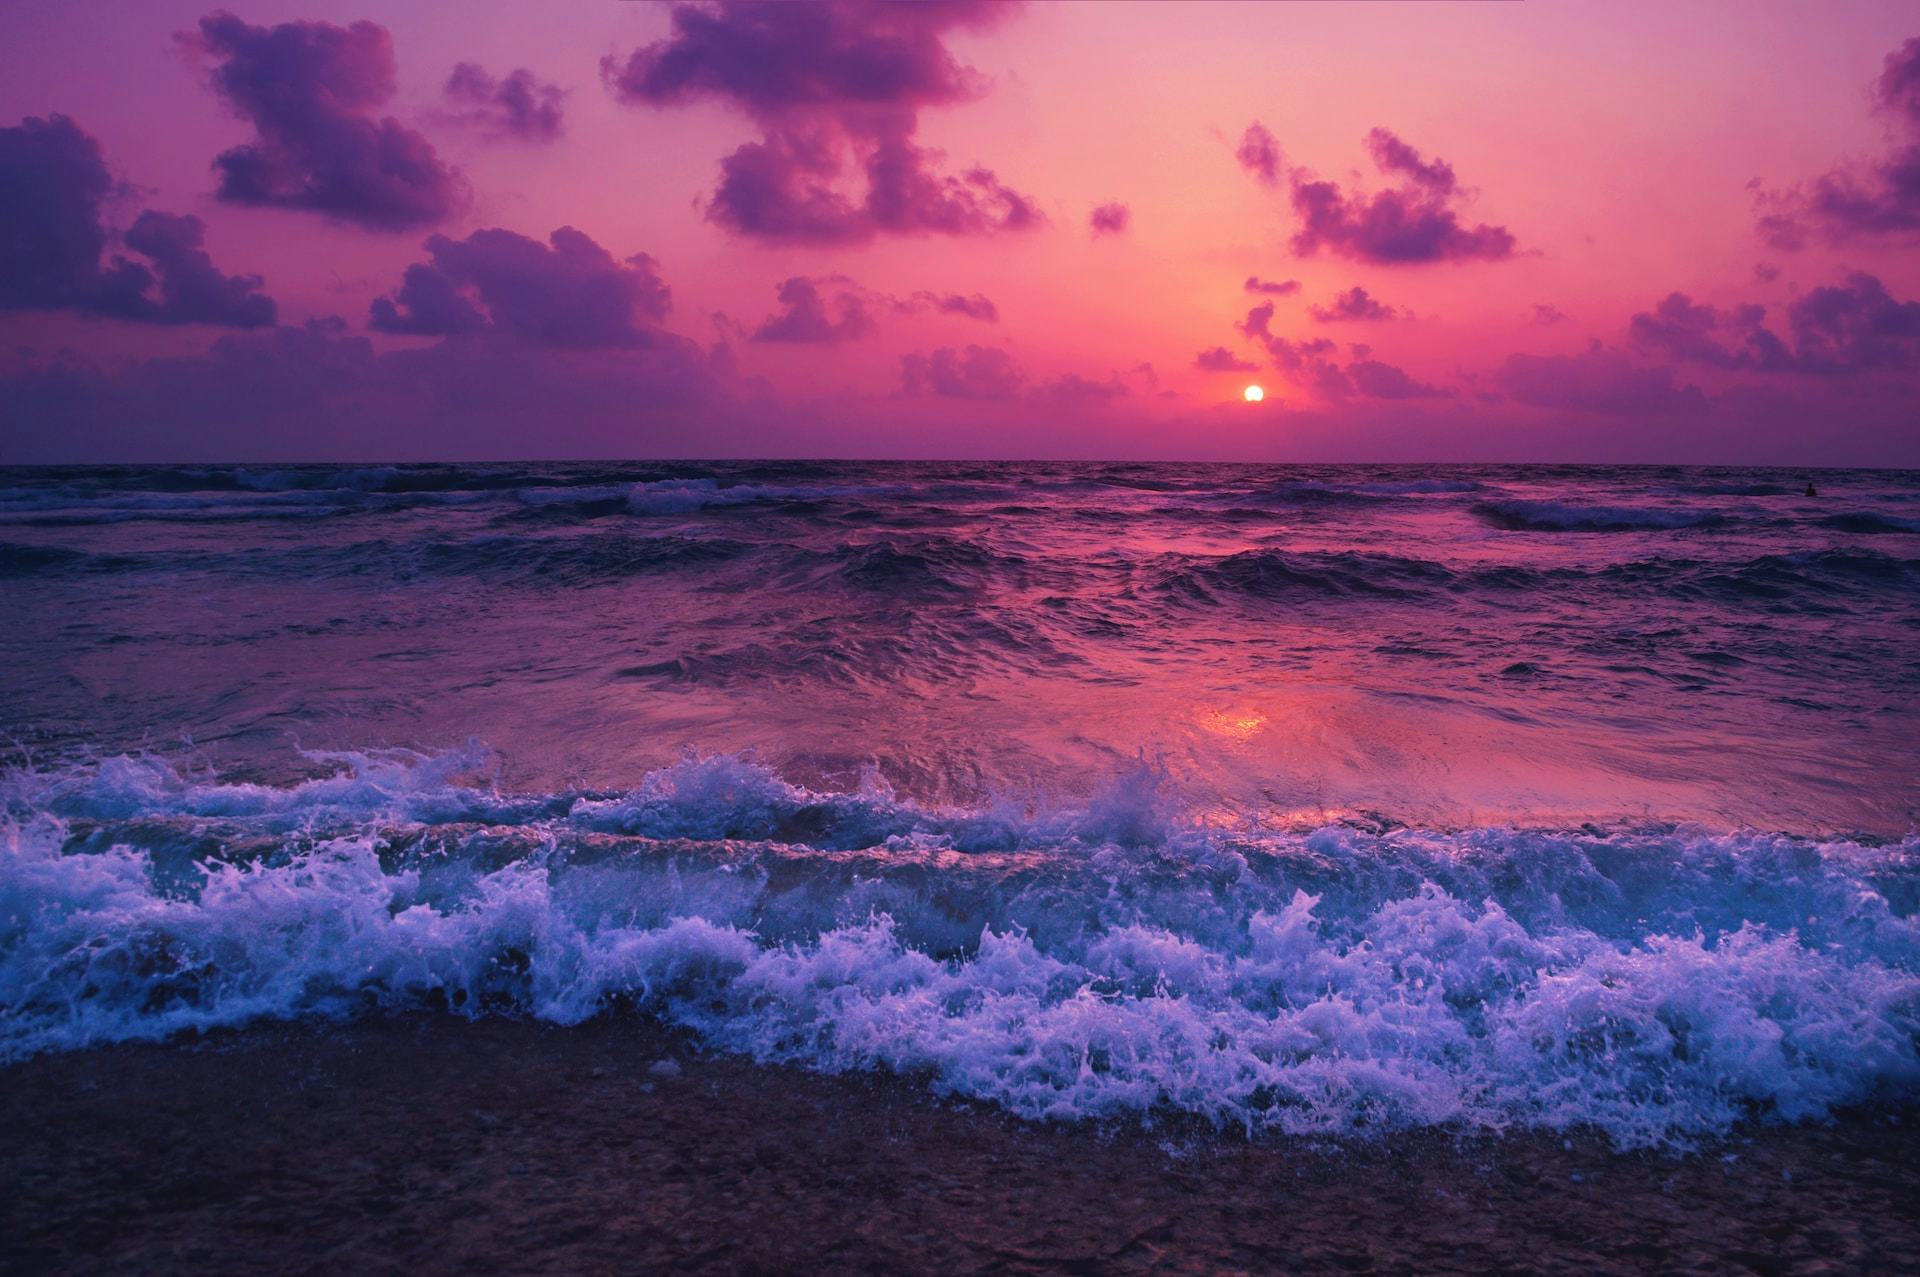 Sunset over pink and purple sky with waves crashing
